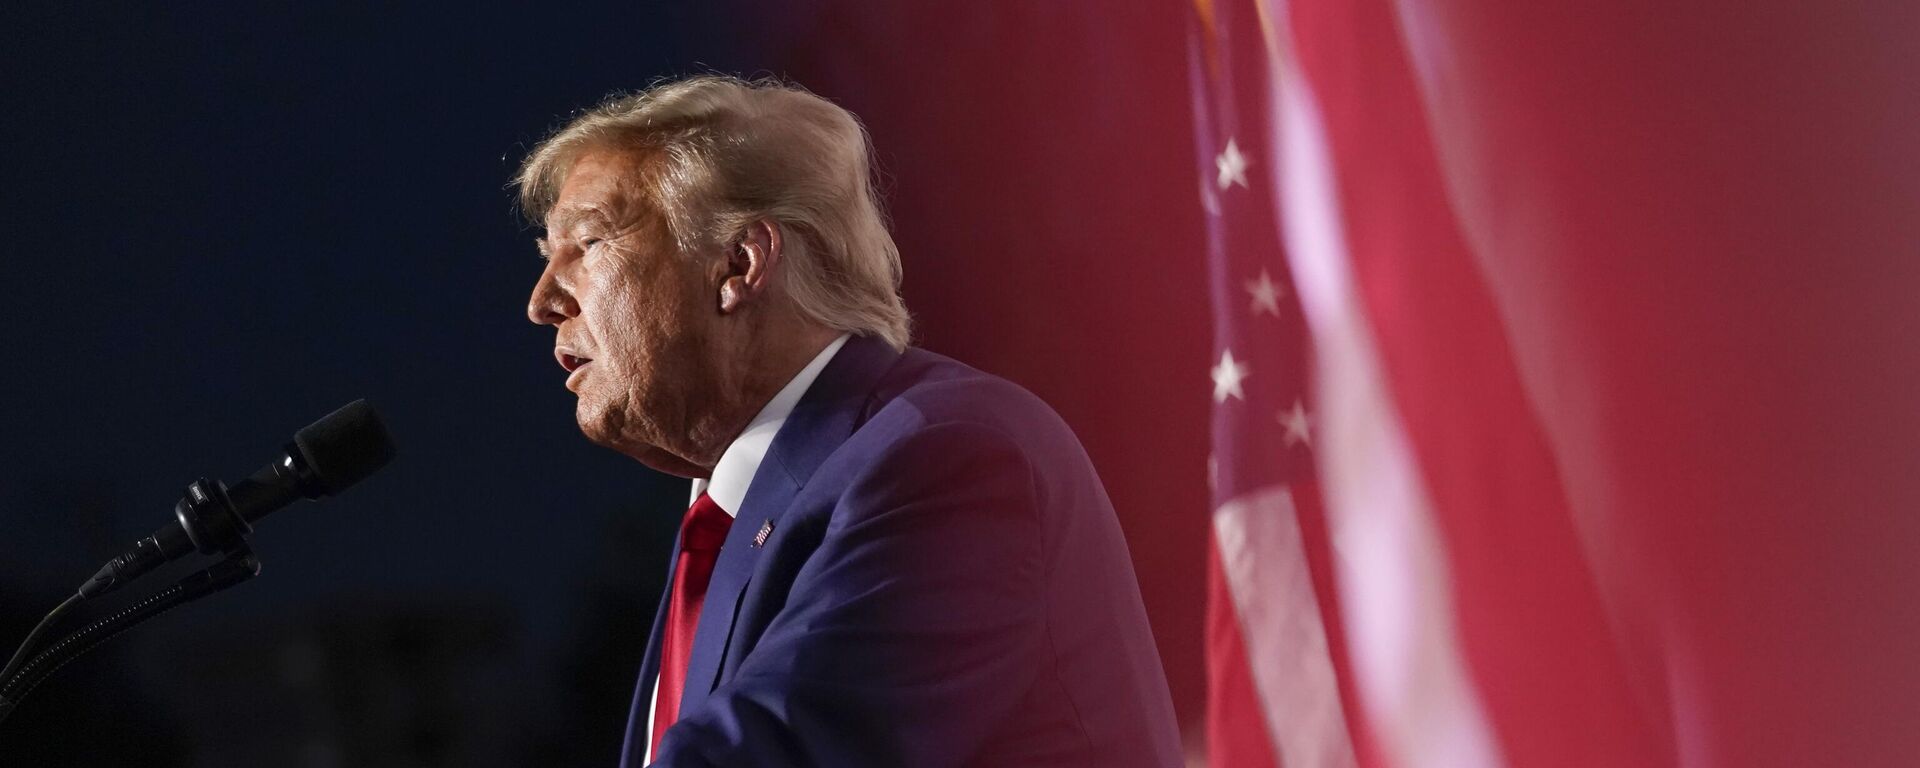 Former President Donald Trump speaks at Trump National Golf Club in Bedminster, N.J., Tuesday, June 13, 2023, after pleading not guilty in a Miami courtroom earlier in the day to dozens of felony counts that he hoarded classified documents and refused government demands to give them back. - Sputnik International, 1920, 24.07.2023